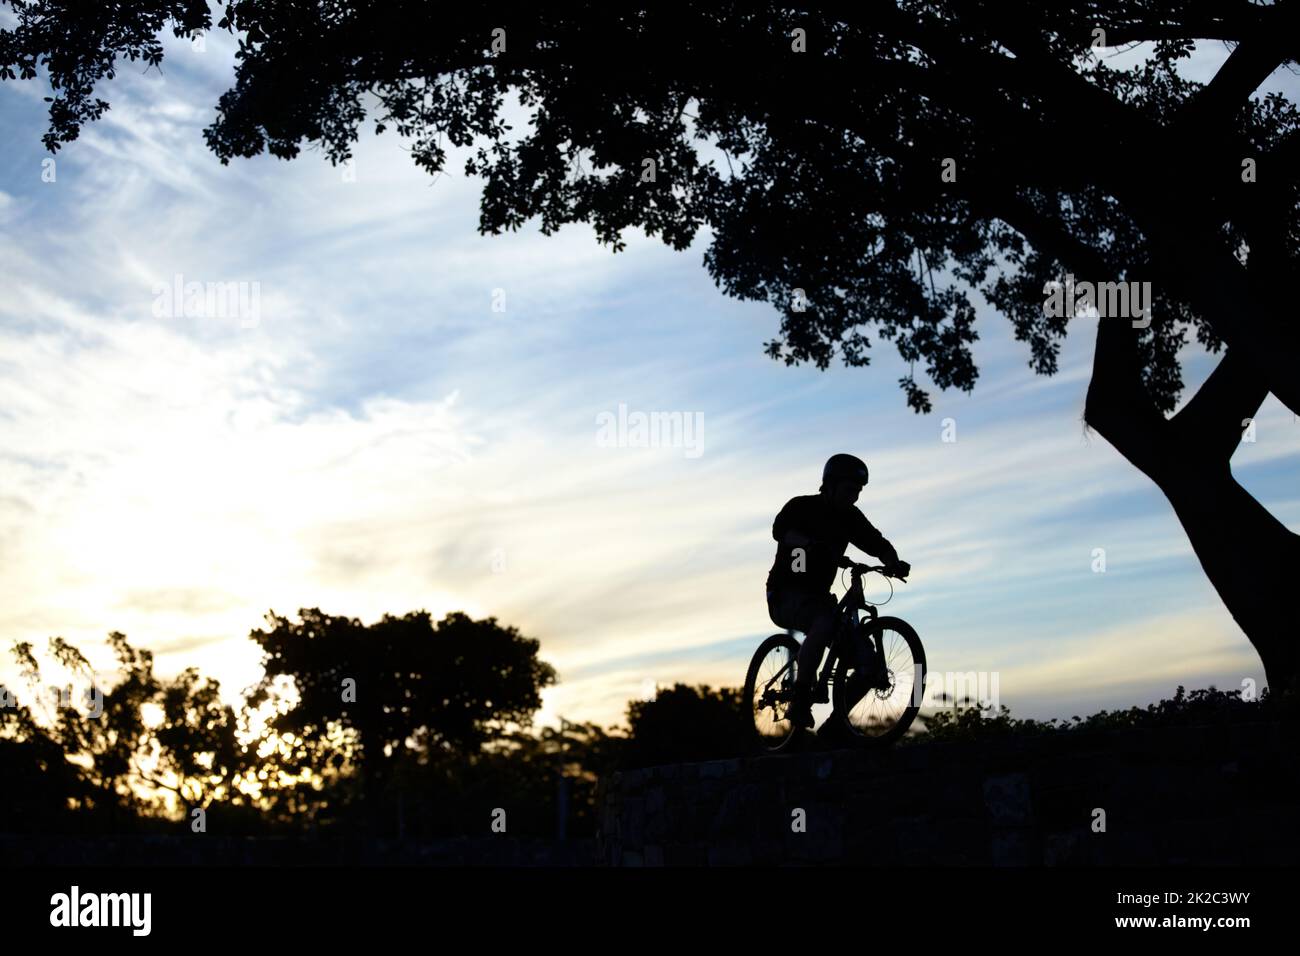 Ride on.... Silhouette shot of a man riding his bike at dusk. Stock Photo